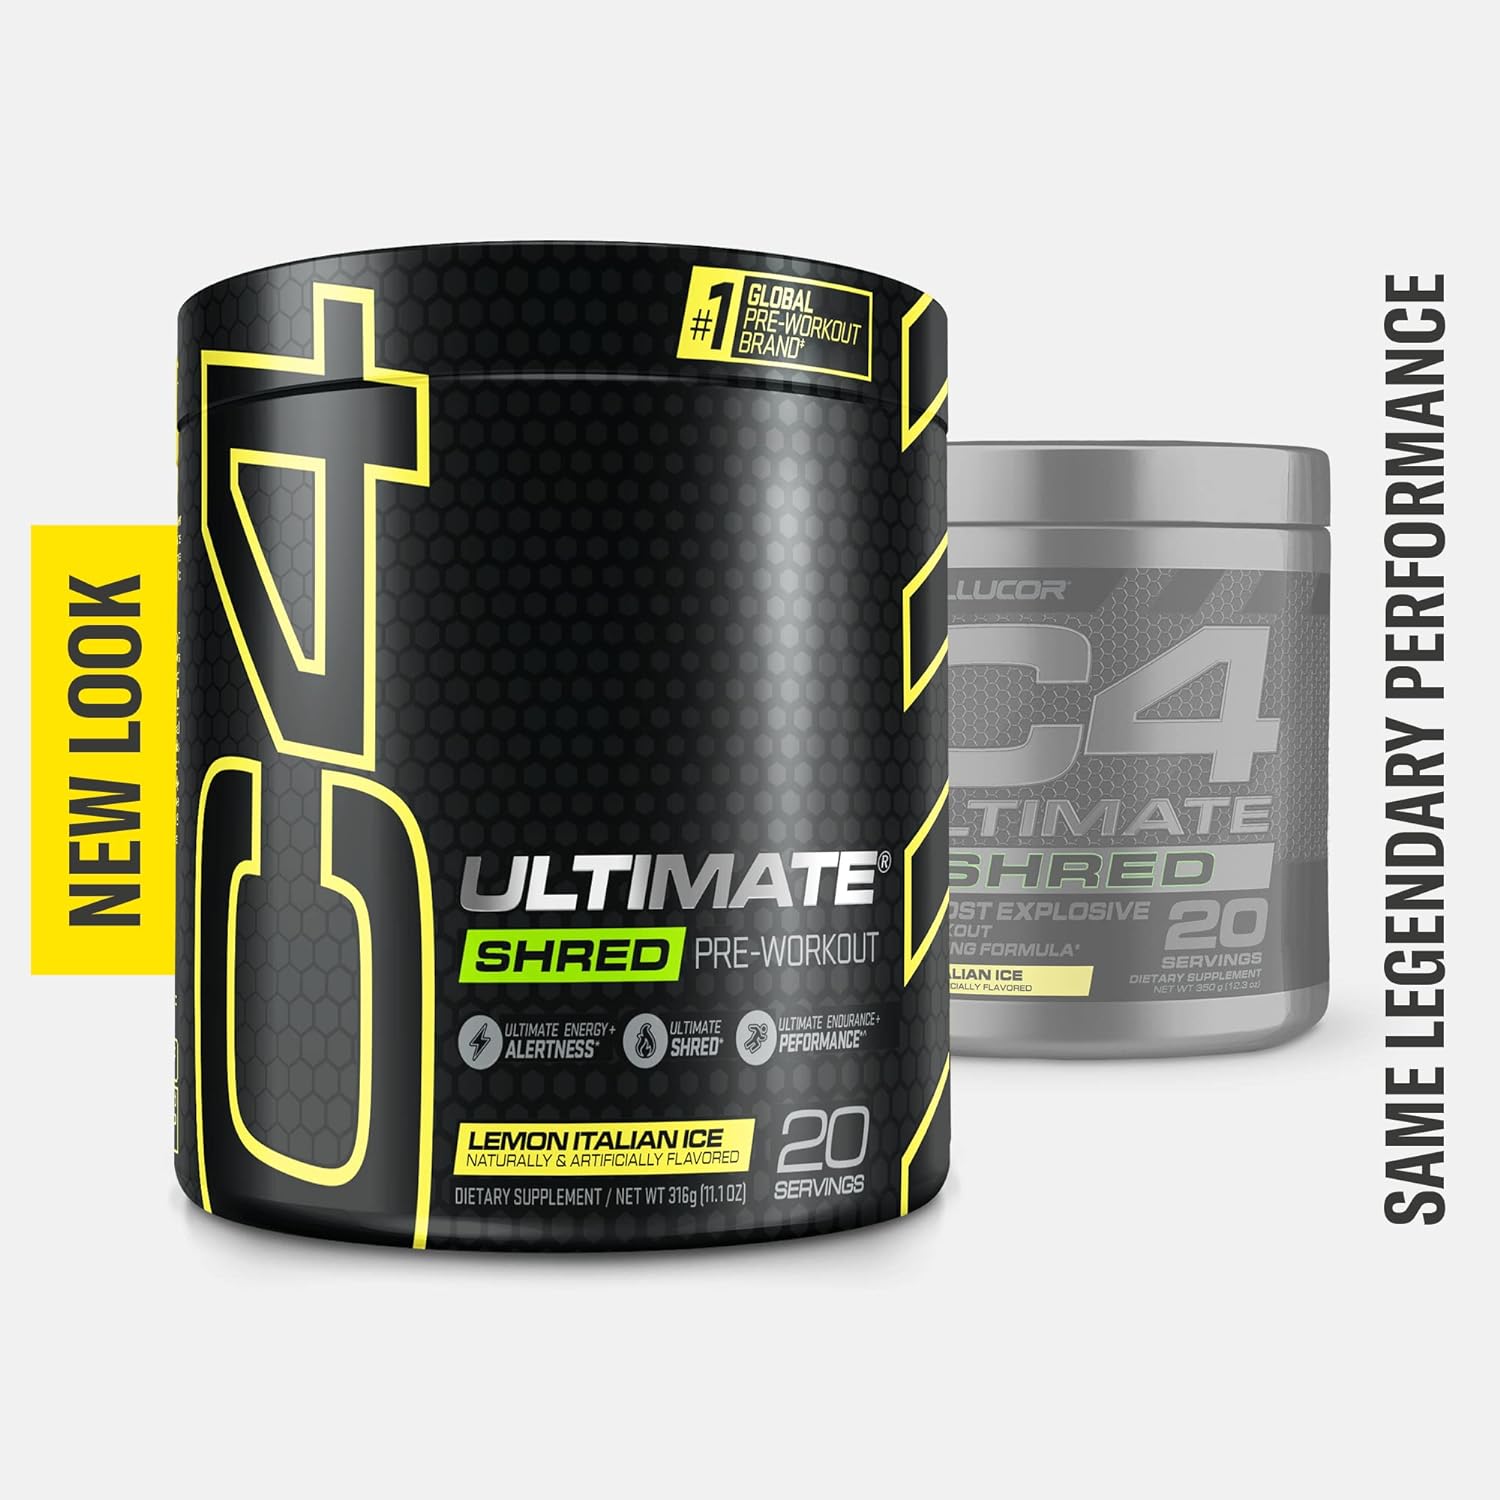 Cellucor C4 Ultimate Shred Pre Workout Powder for Men & Women, Metabolism Supplement with Ginger Root Extract, Lemon Italian Ice, 20 Servings (Pack of 1) : Health & Household